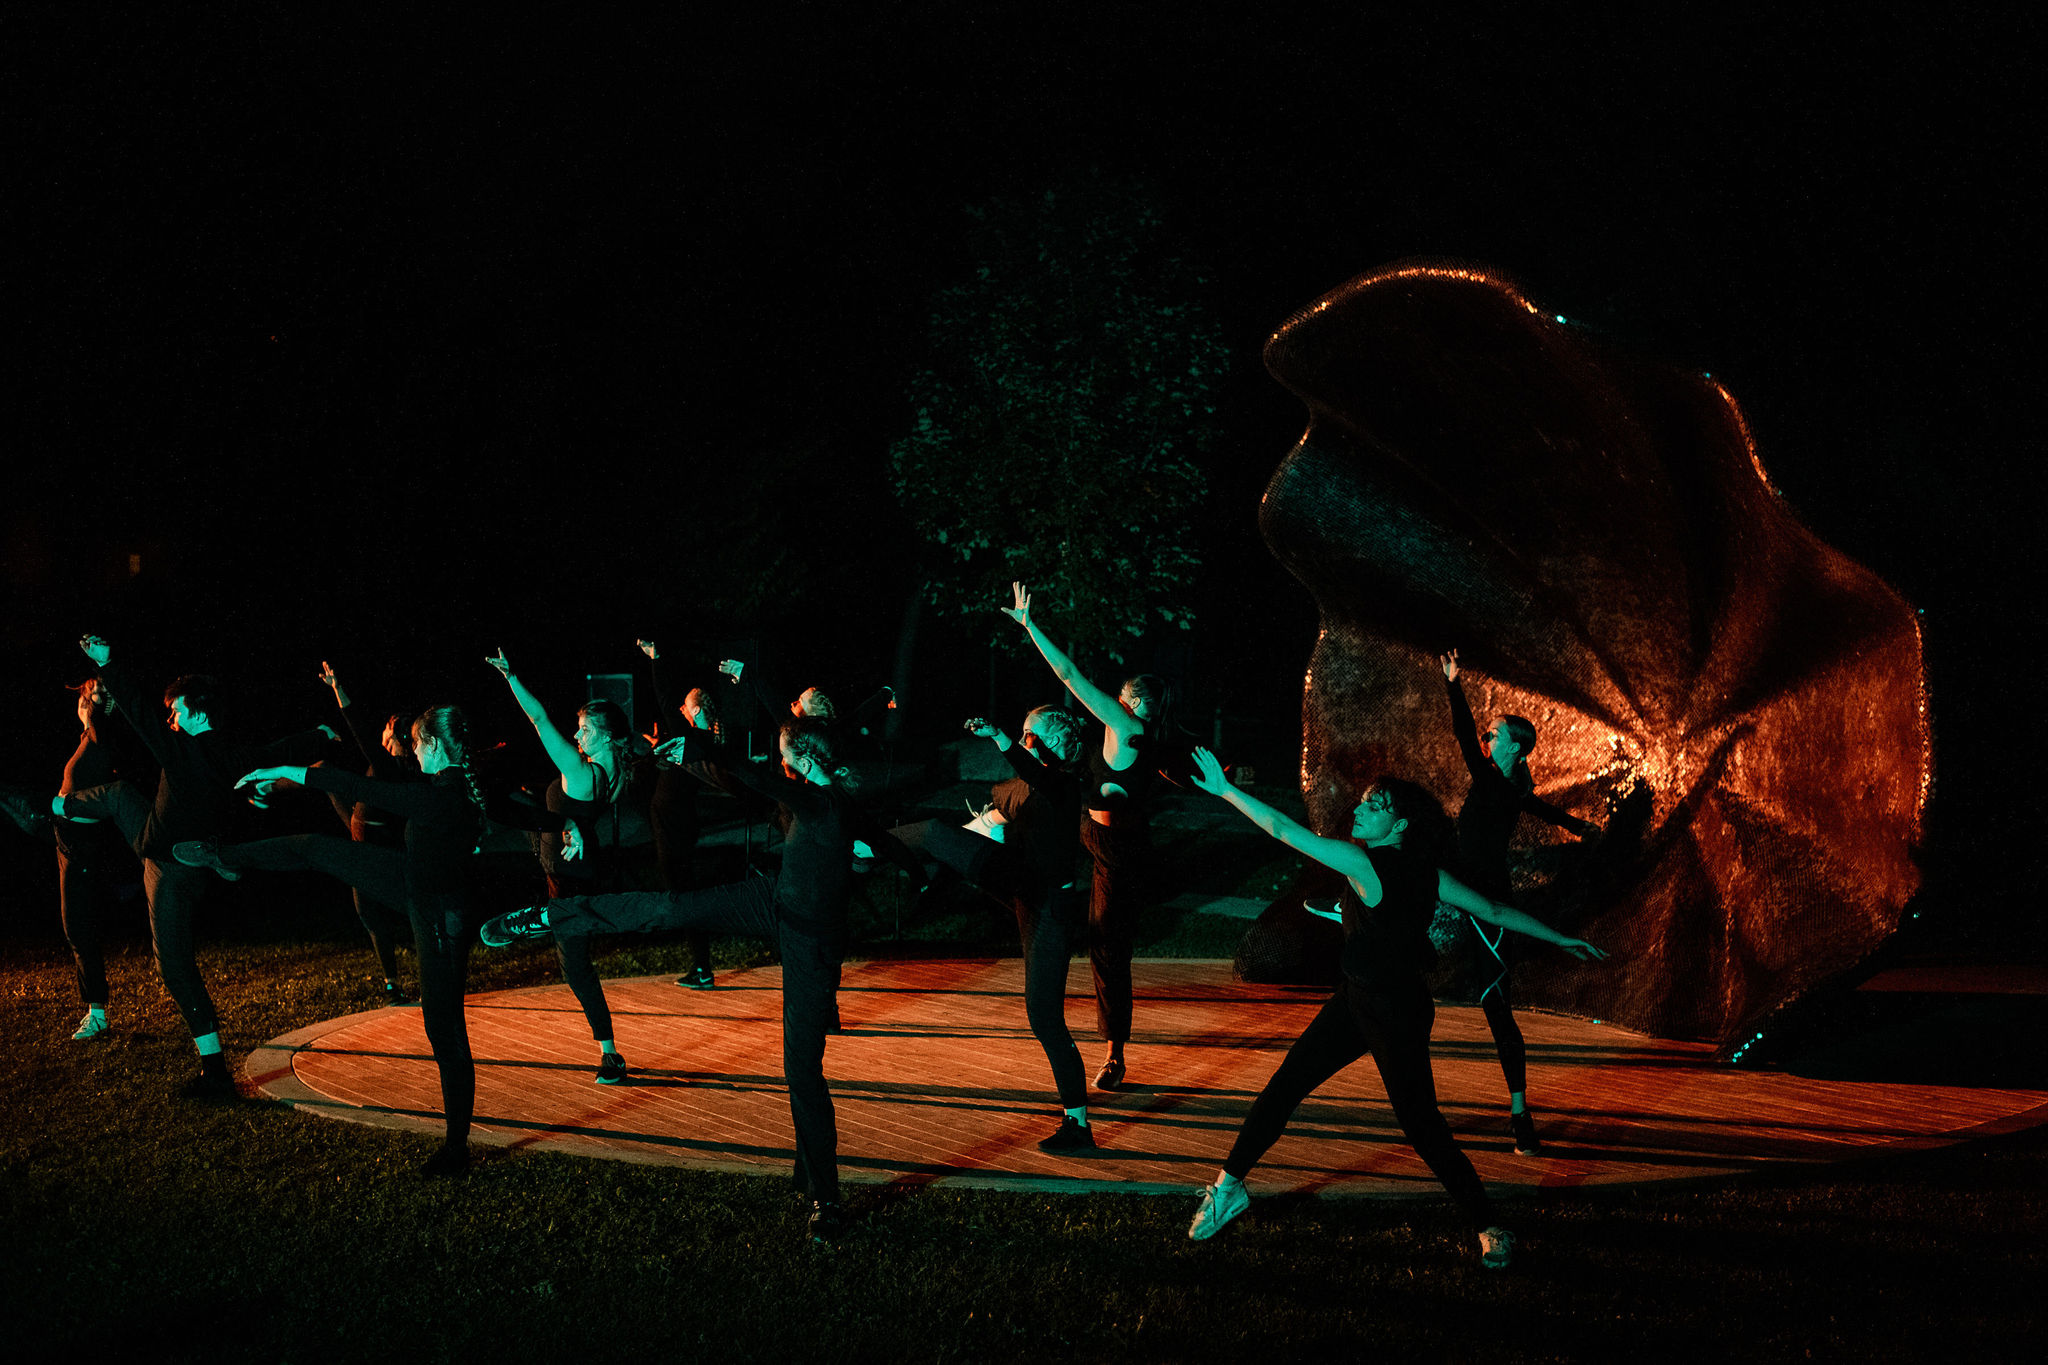 A group of dances all wearing black dance in unison on a wooden stage. They are lit with green light.